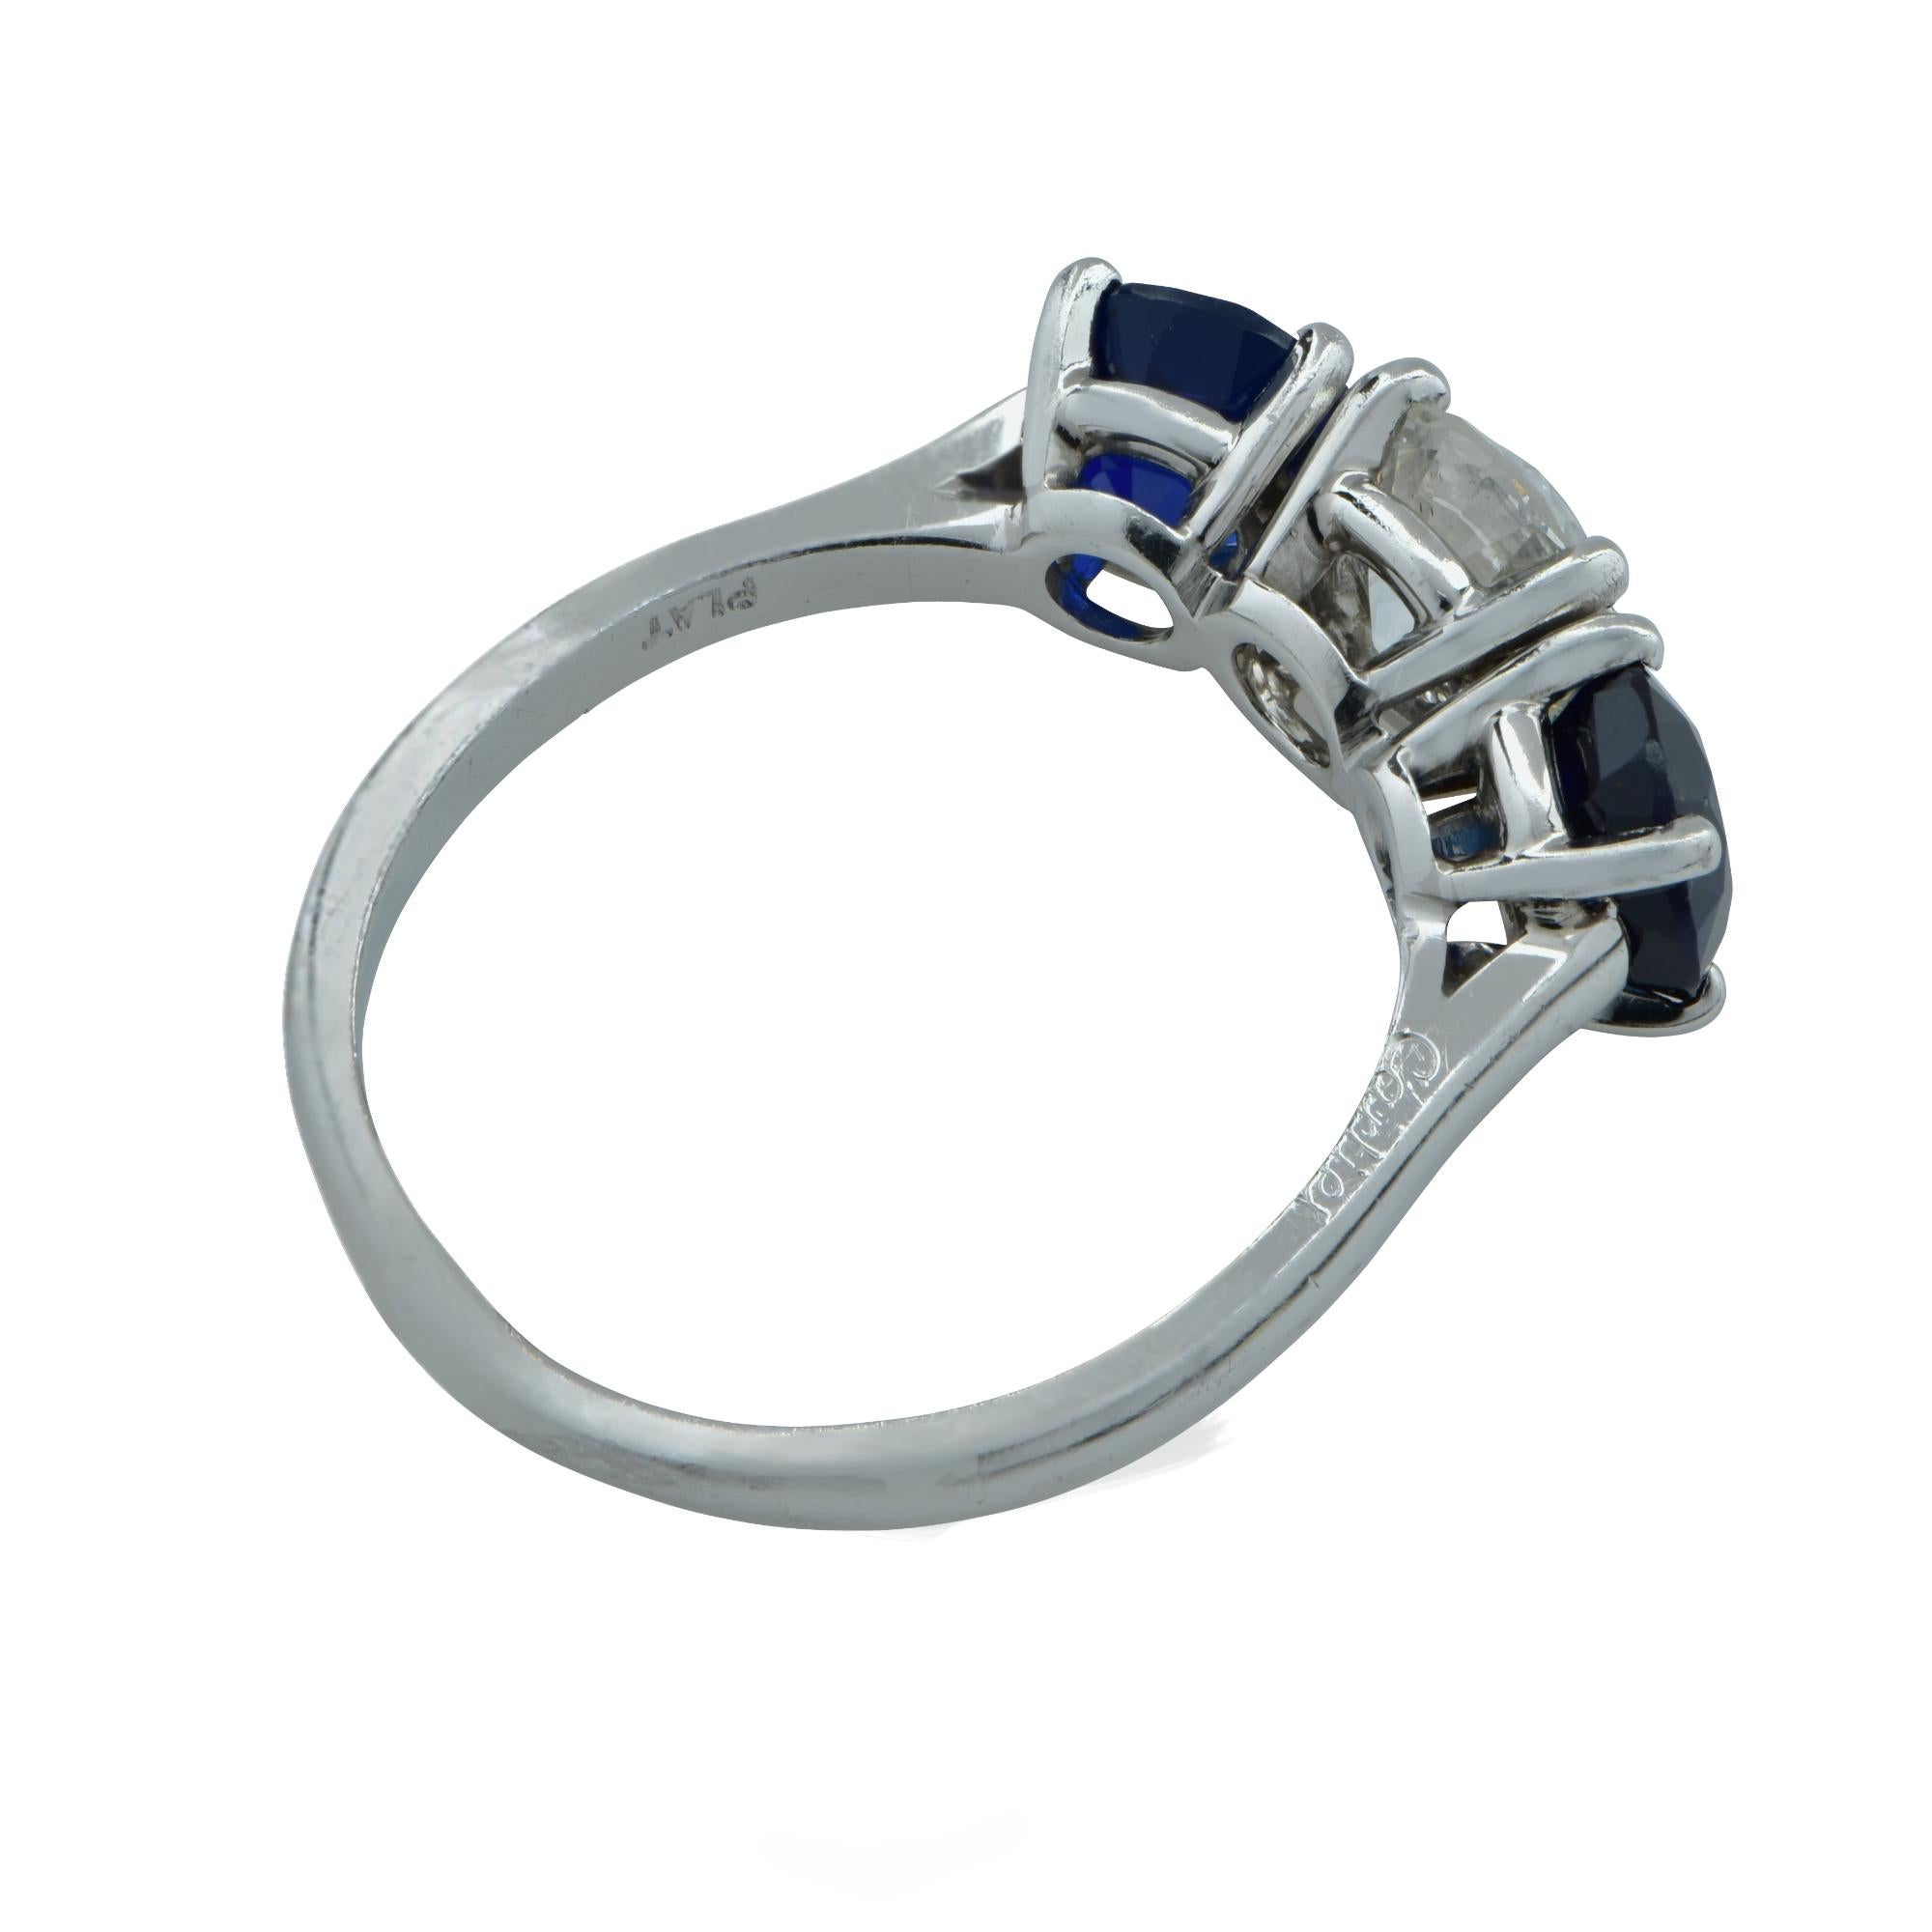 pectacular Cartier Art Deco diamond and sapphire three stone ring elegantly crafted in platinum. This stunning ring exemplifies Cartier’s craftsmanship boasting a stunning European Cut diamond weighing approximately 1.05 carats, G color, VS2